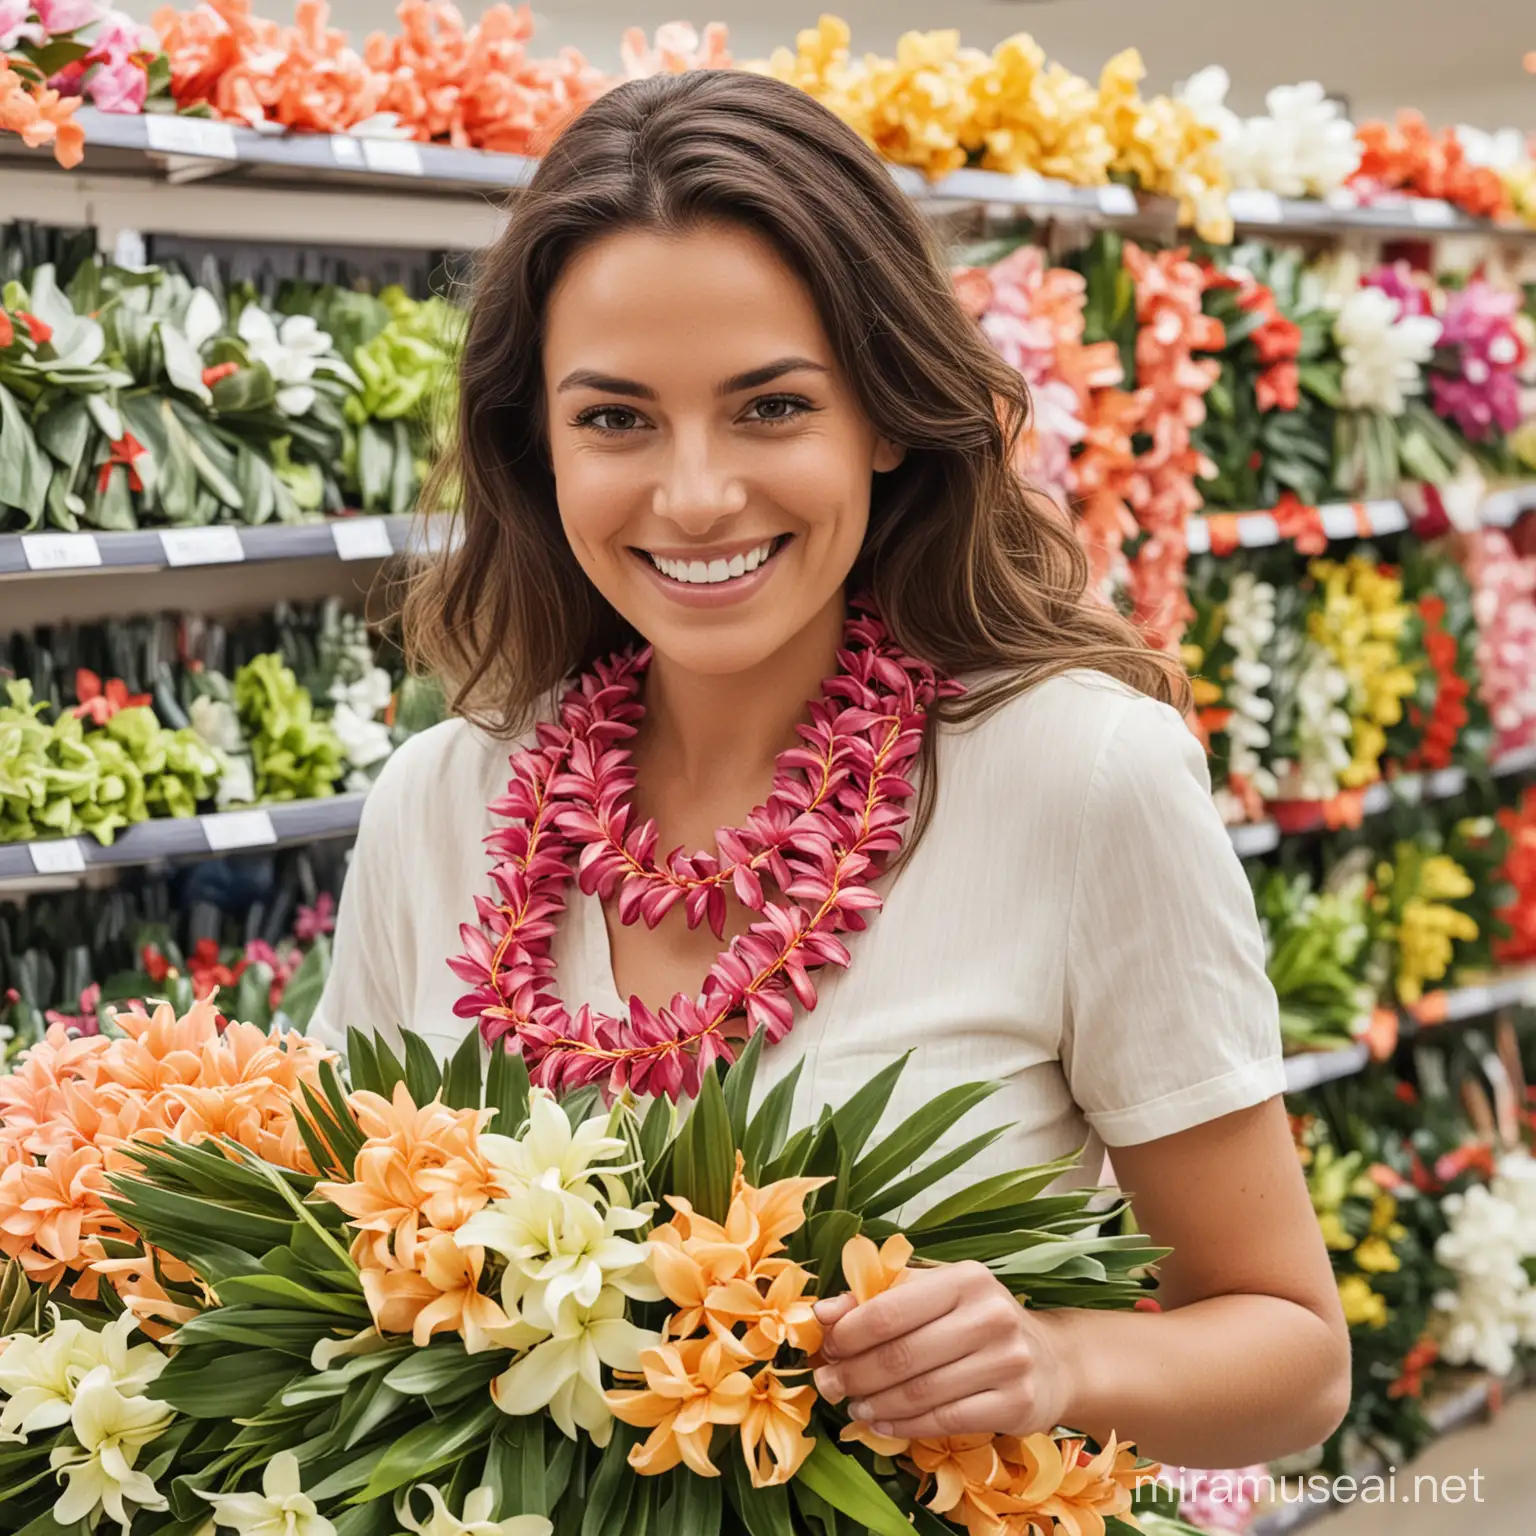 Joyful Woman Shopping with Leis Tropical Retail Therapy